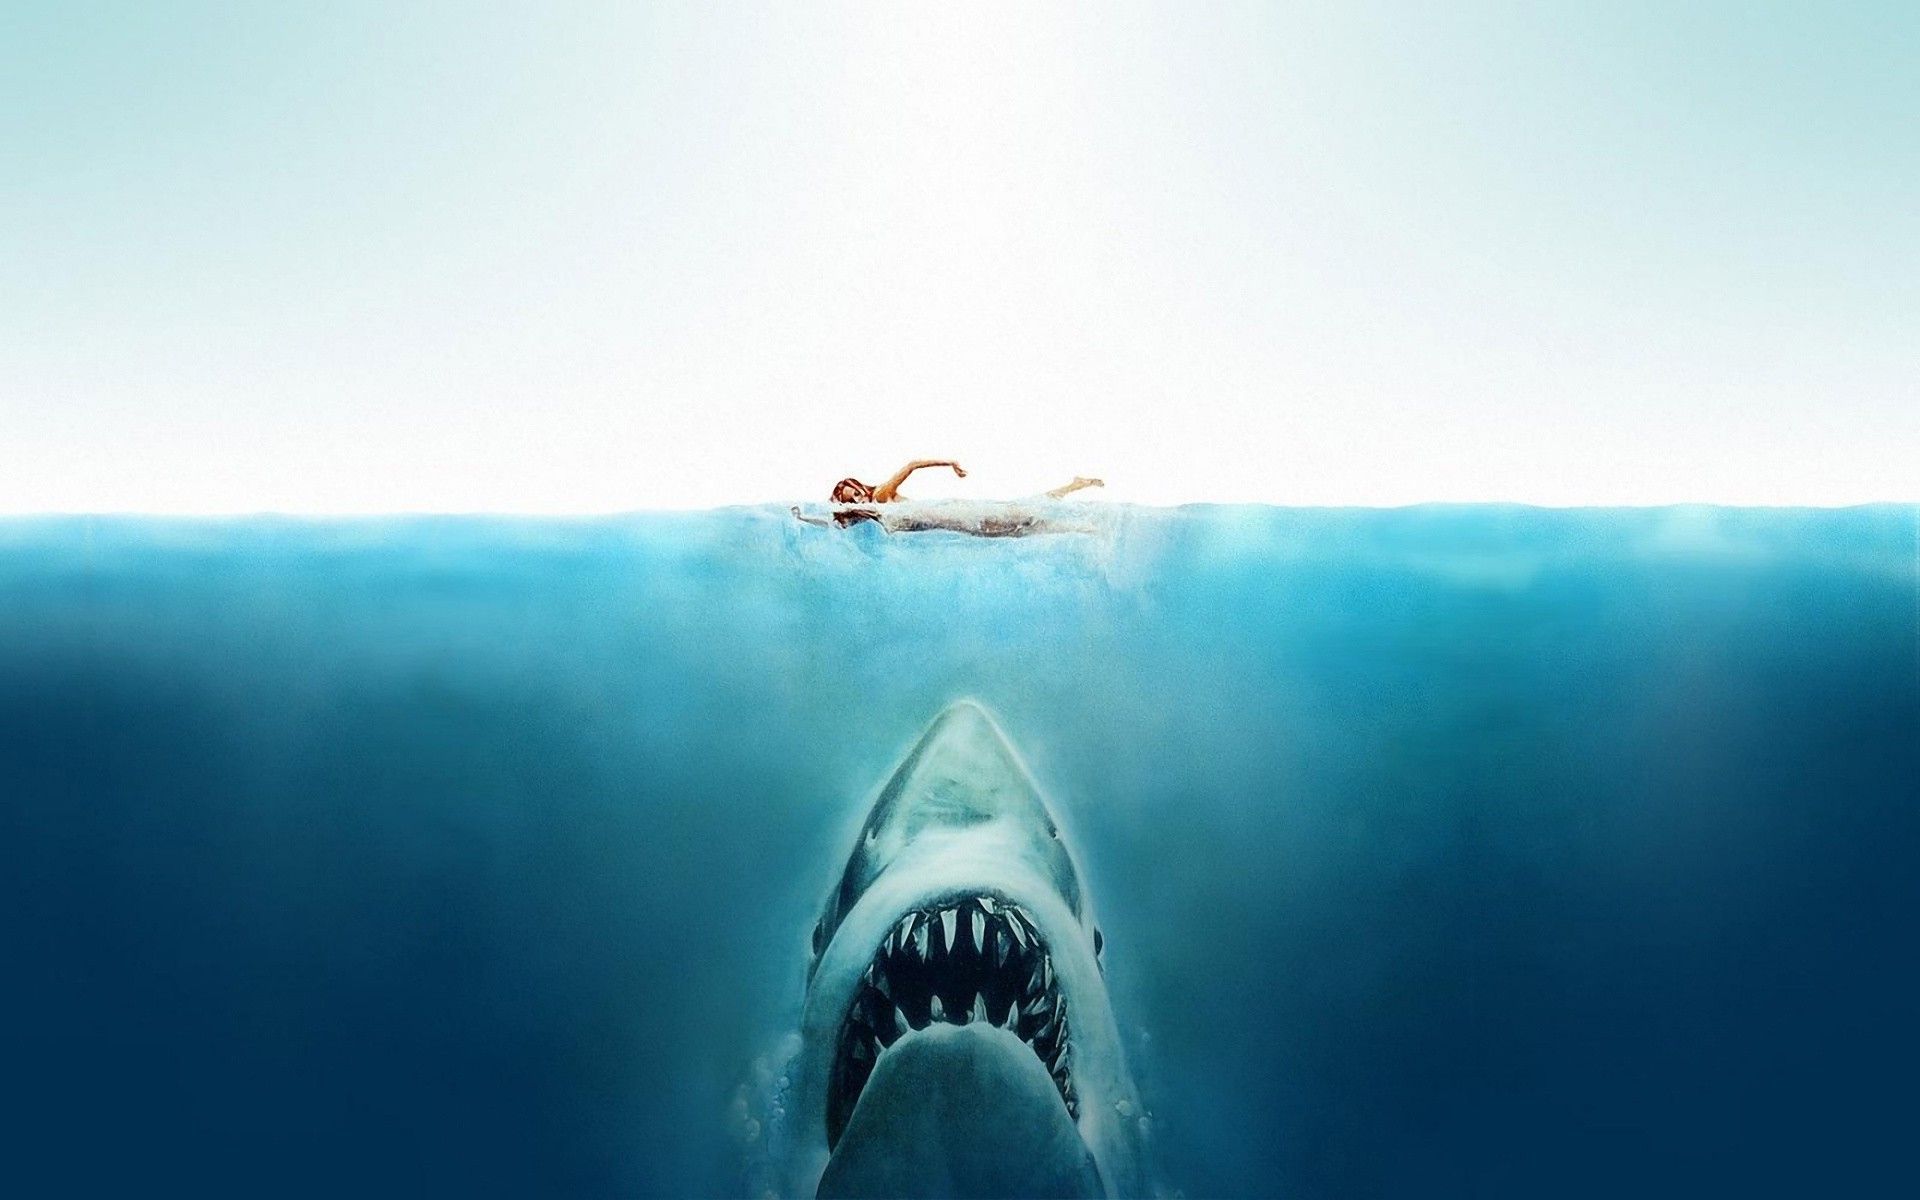 Download HD Wallpaper Of 248848 Jaws, Movies, Shark, Split View. Free Download High Quality And Widescreen Resolutions Deskt. Movies, Spielberg, Creature Feature